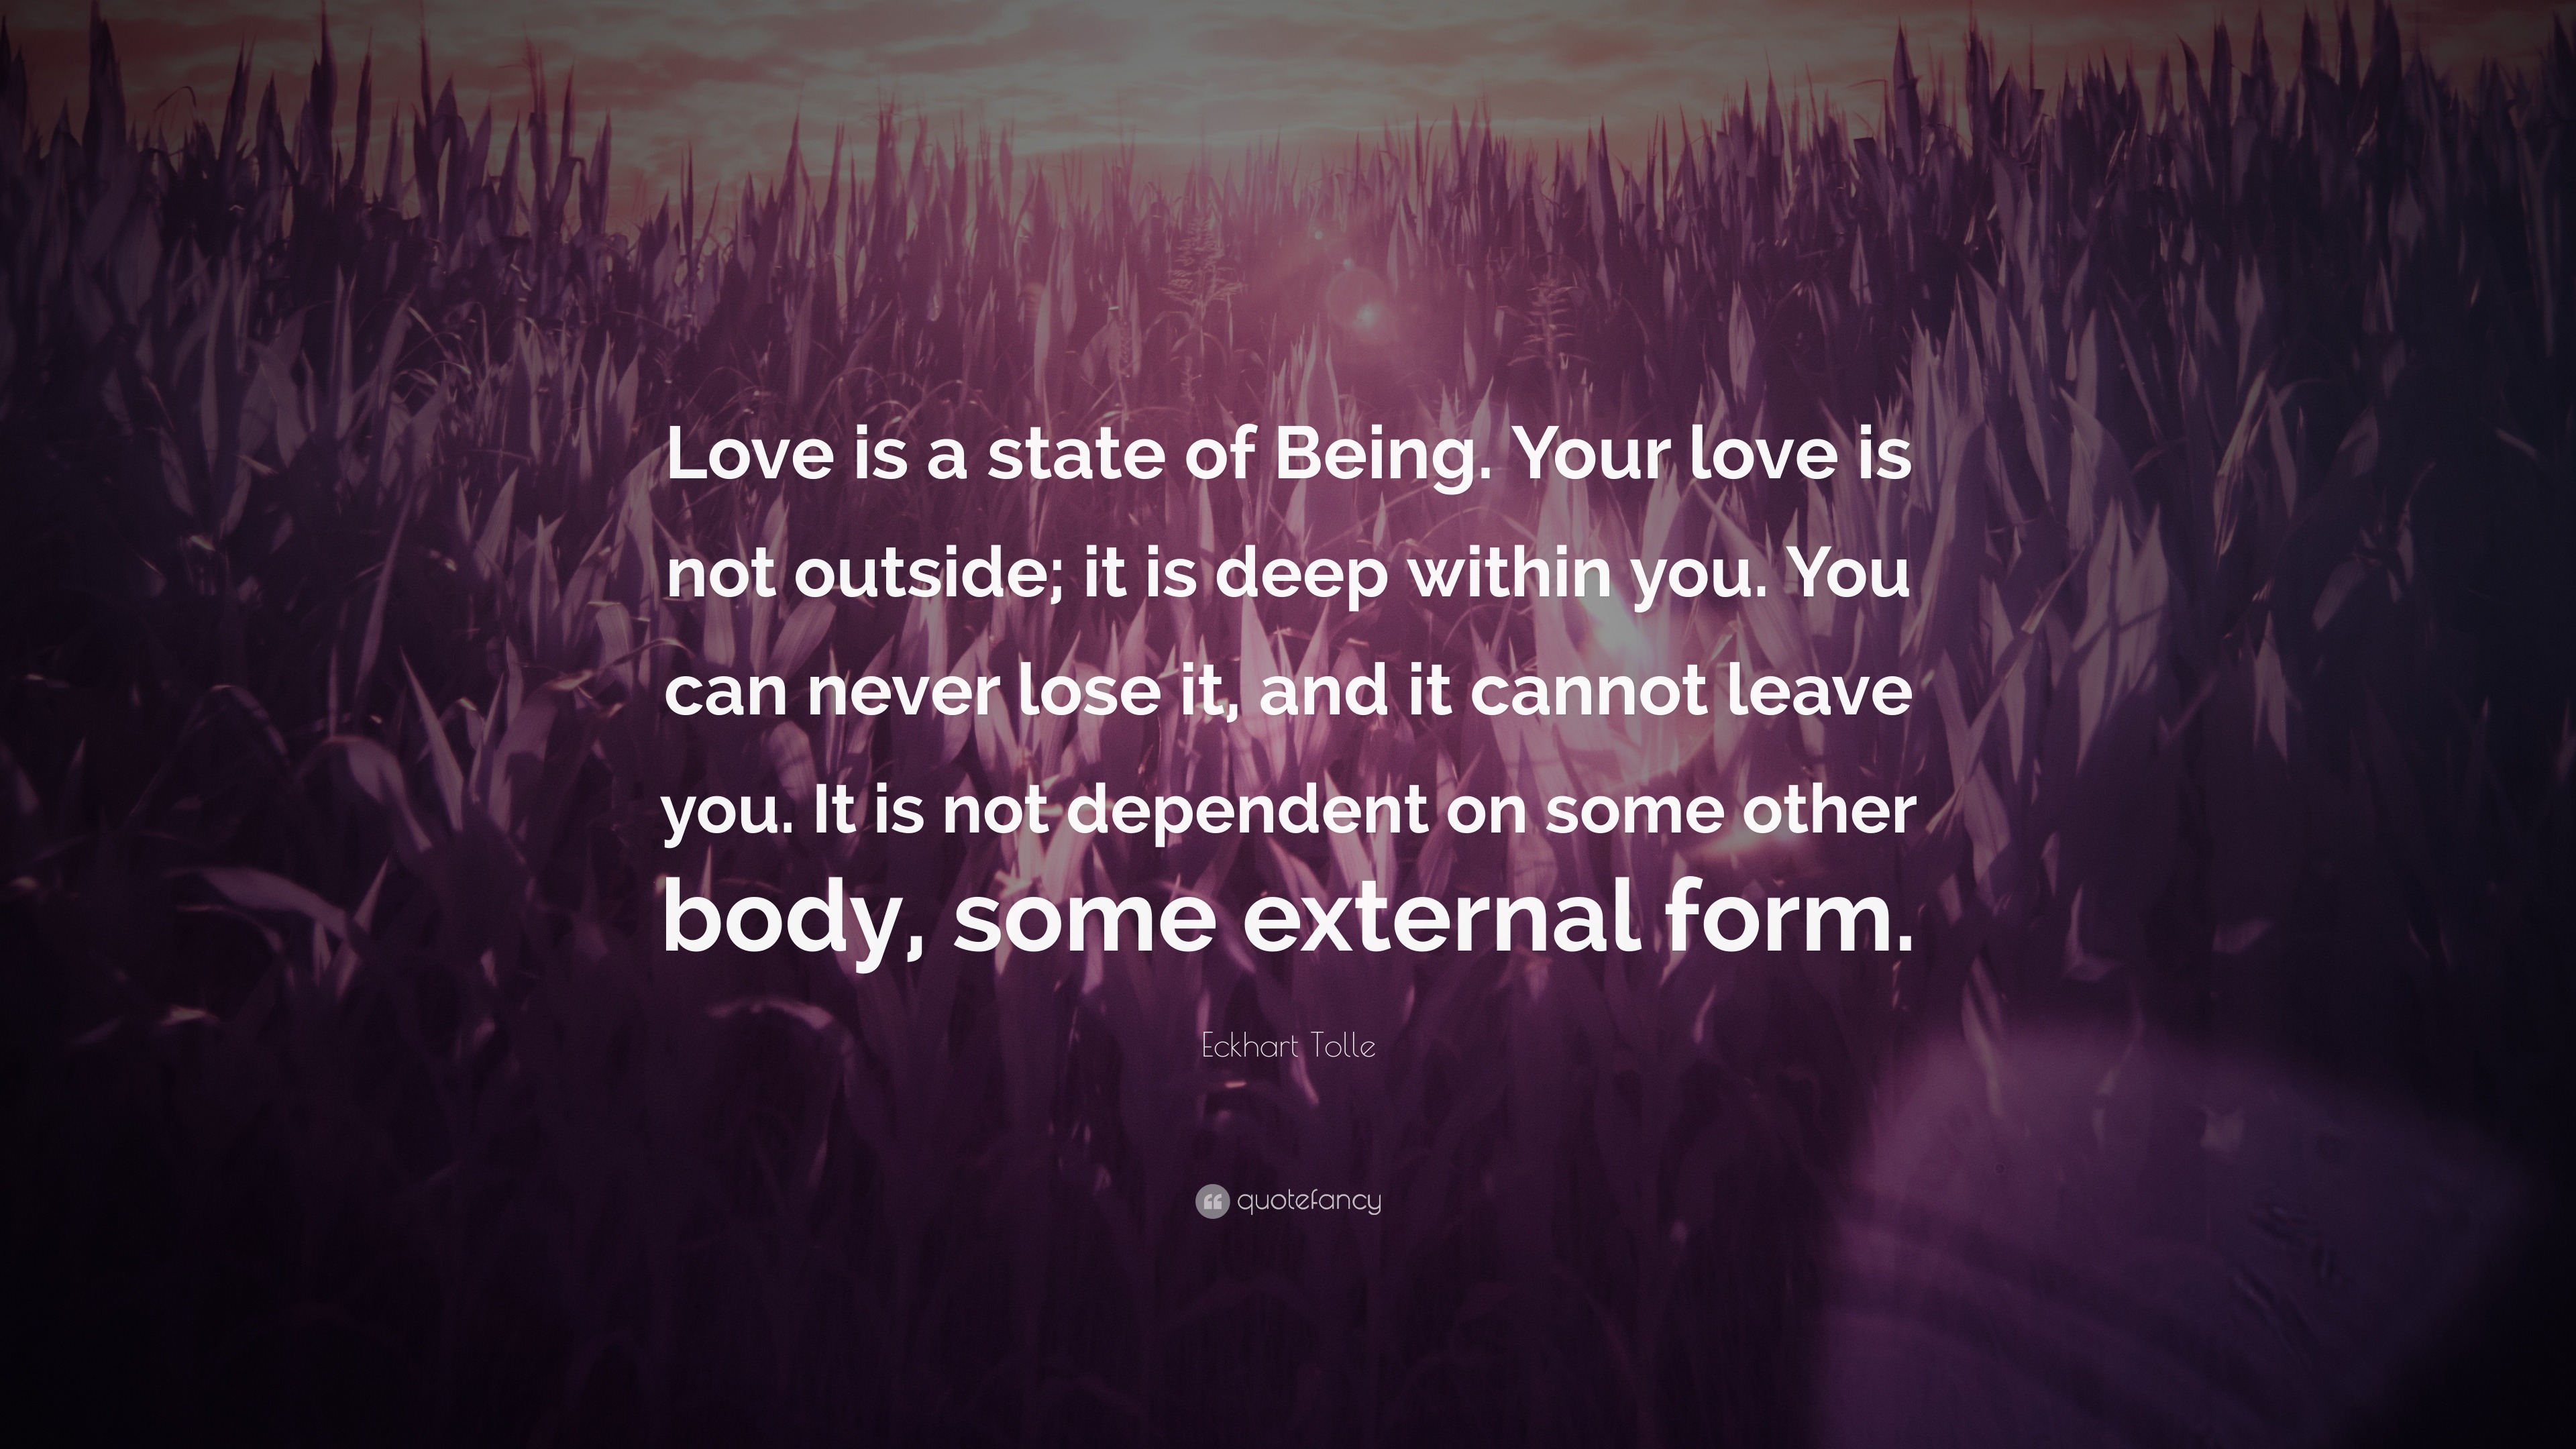 Eckhart Tolle Quote “love Is A State Of Being Your Love Is Not